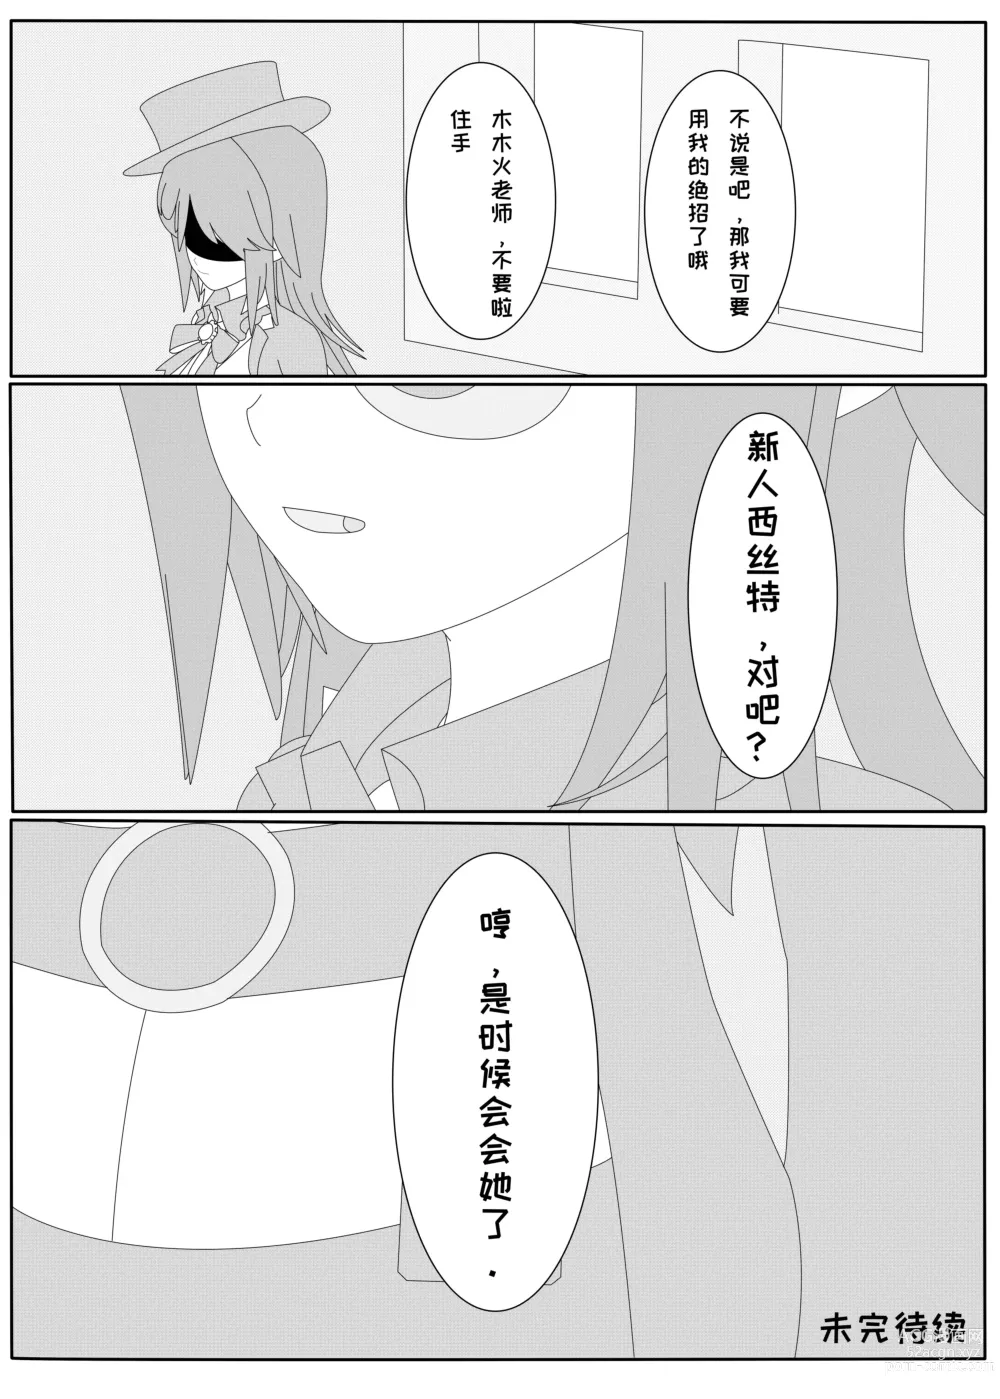 Page 26 of doujinshi 鲸之恋2（西丝特Xether）